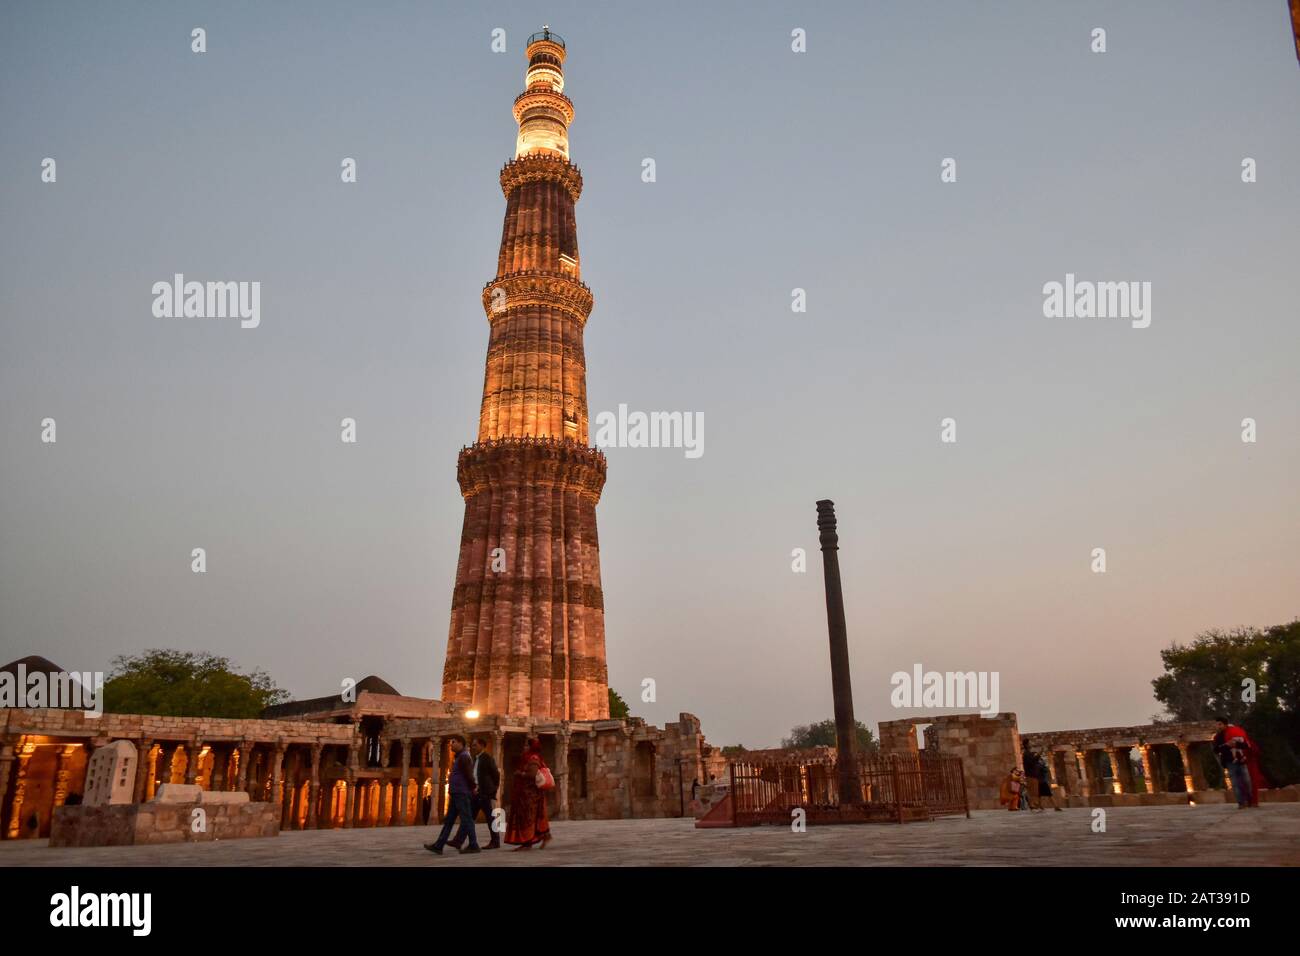 Visitors walk around the historic Qutub Minar in Delhi.Qutub Minar, a UNESCO World Heritage Site, is the tallest minaret in India. The Qutub Minar was built in the early 13th century a few kilometers south of Delhi. Stock Photo